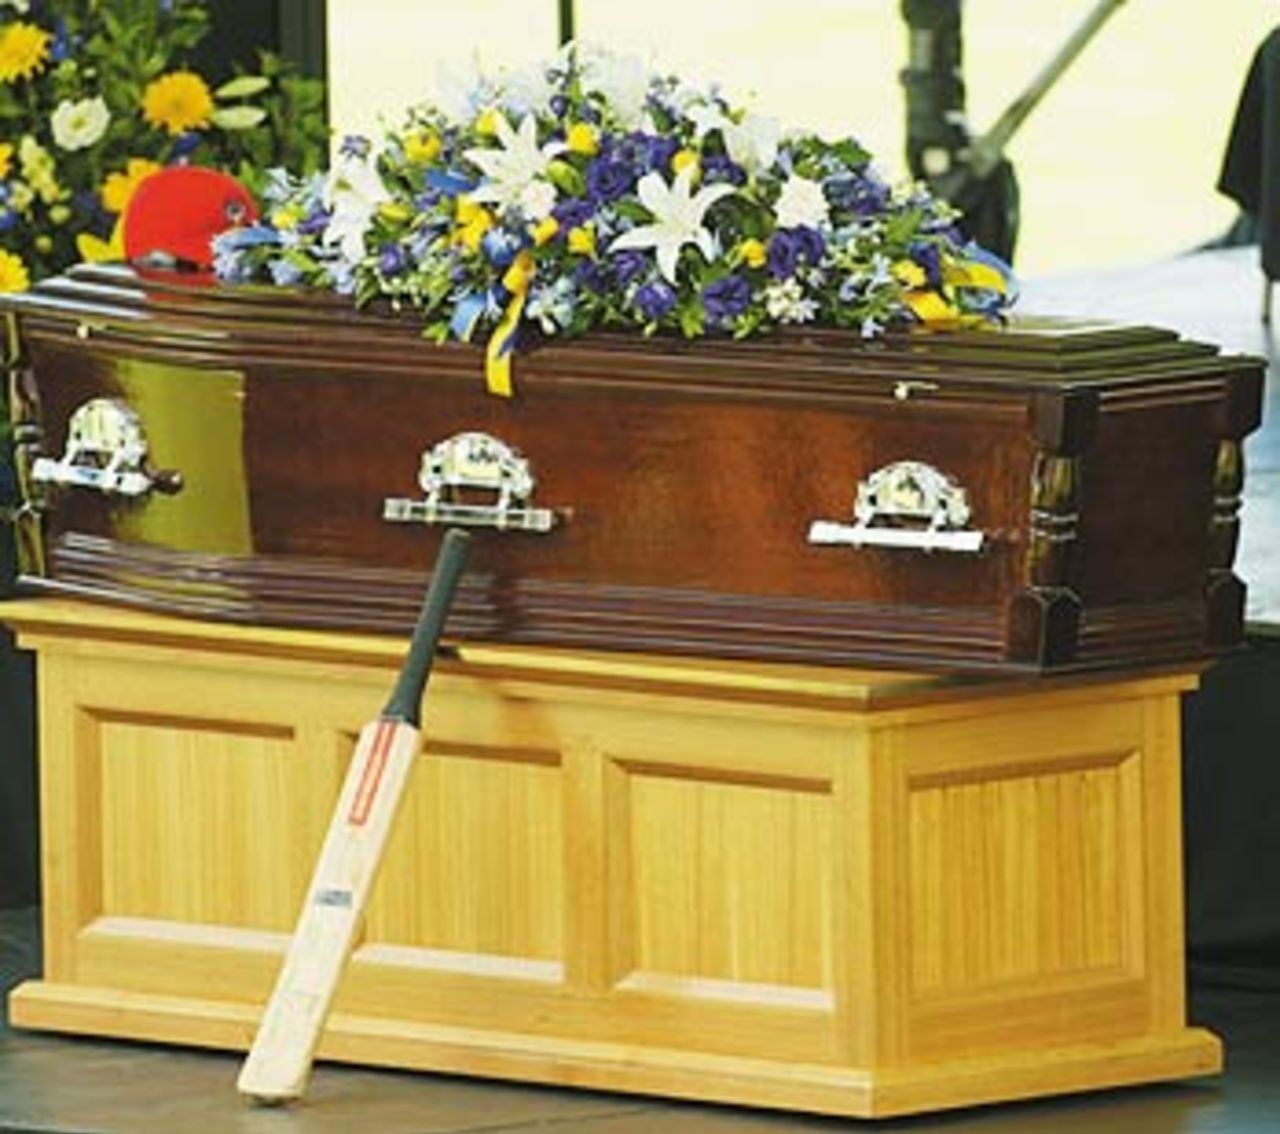 A cricket bat rests against the coffin, Adelaide, January 27, 2004